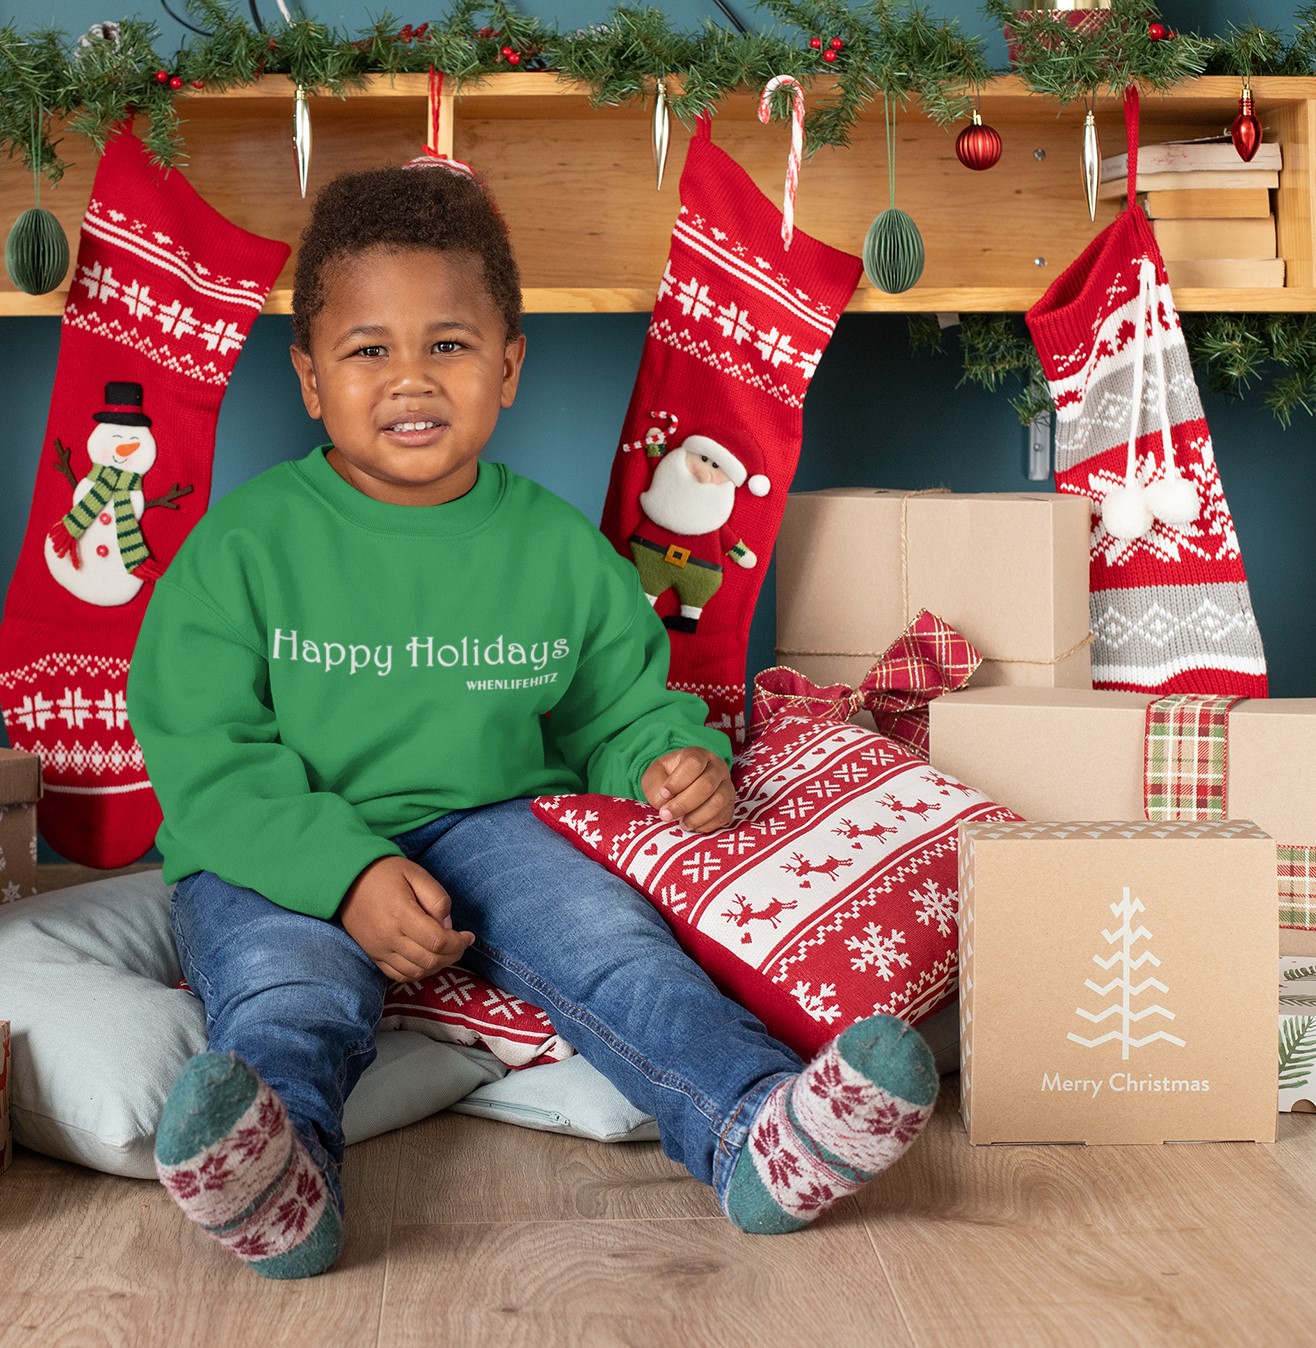 "Happy Holidays" Long Sleeved Fleece Sweatshirt for the Holiday Season in Toddler sizes